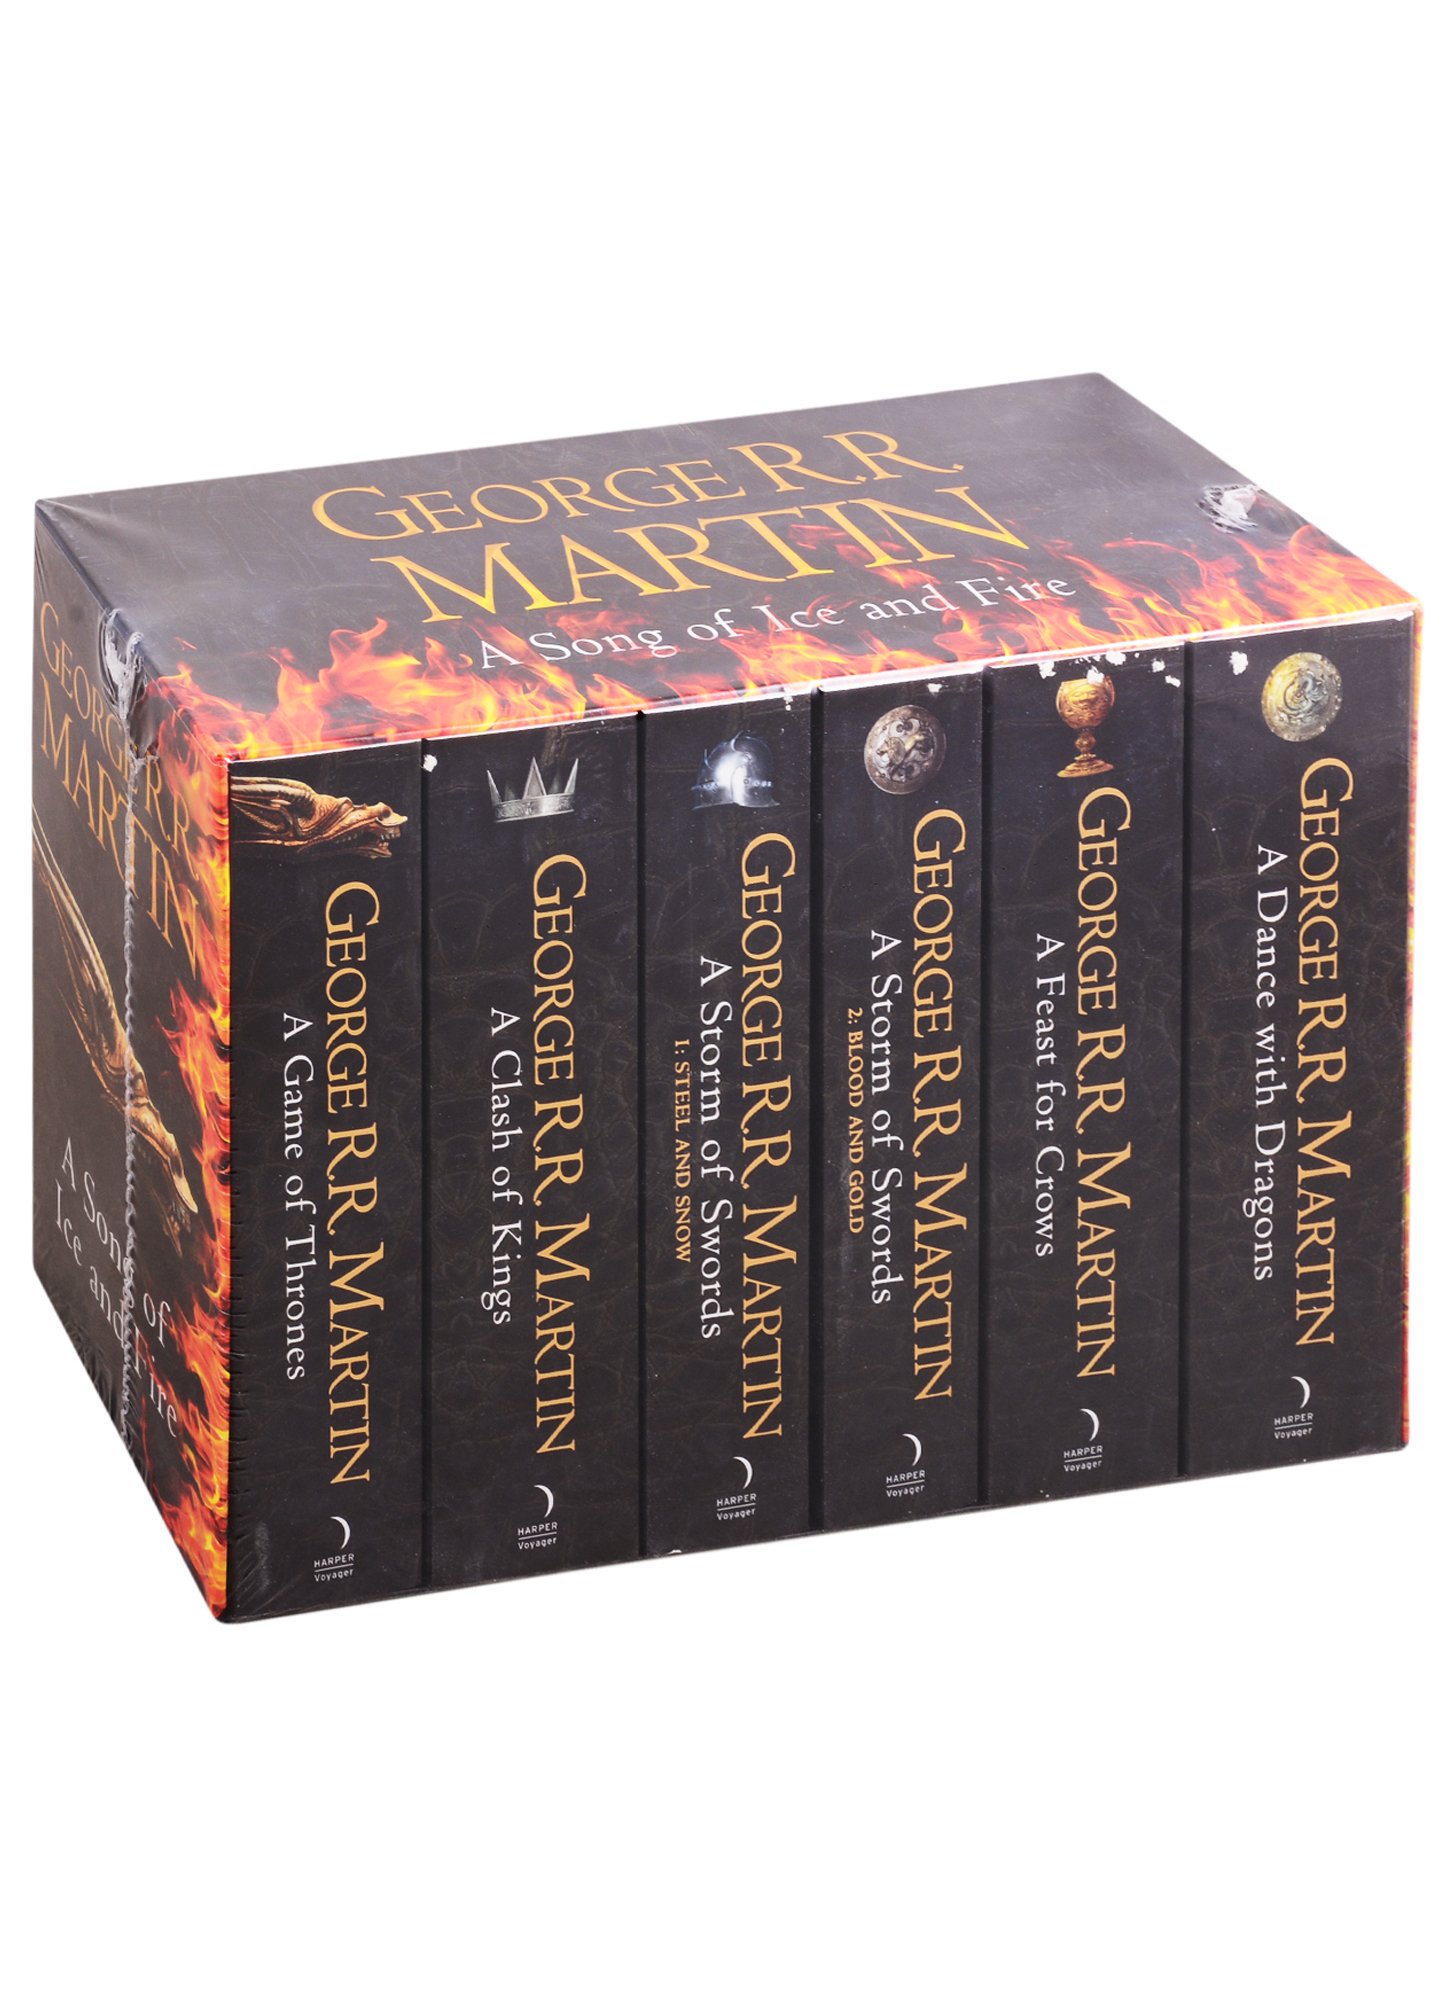 Martin George Raymond Richard Song of Ice and Fire-Game of Thrones: The complete box set of all 6 books Martin George R. R. martin g a clash of kings the illustrated edition a song of ice and fire book two